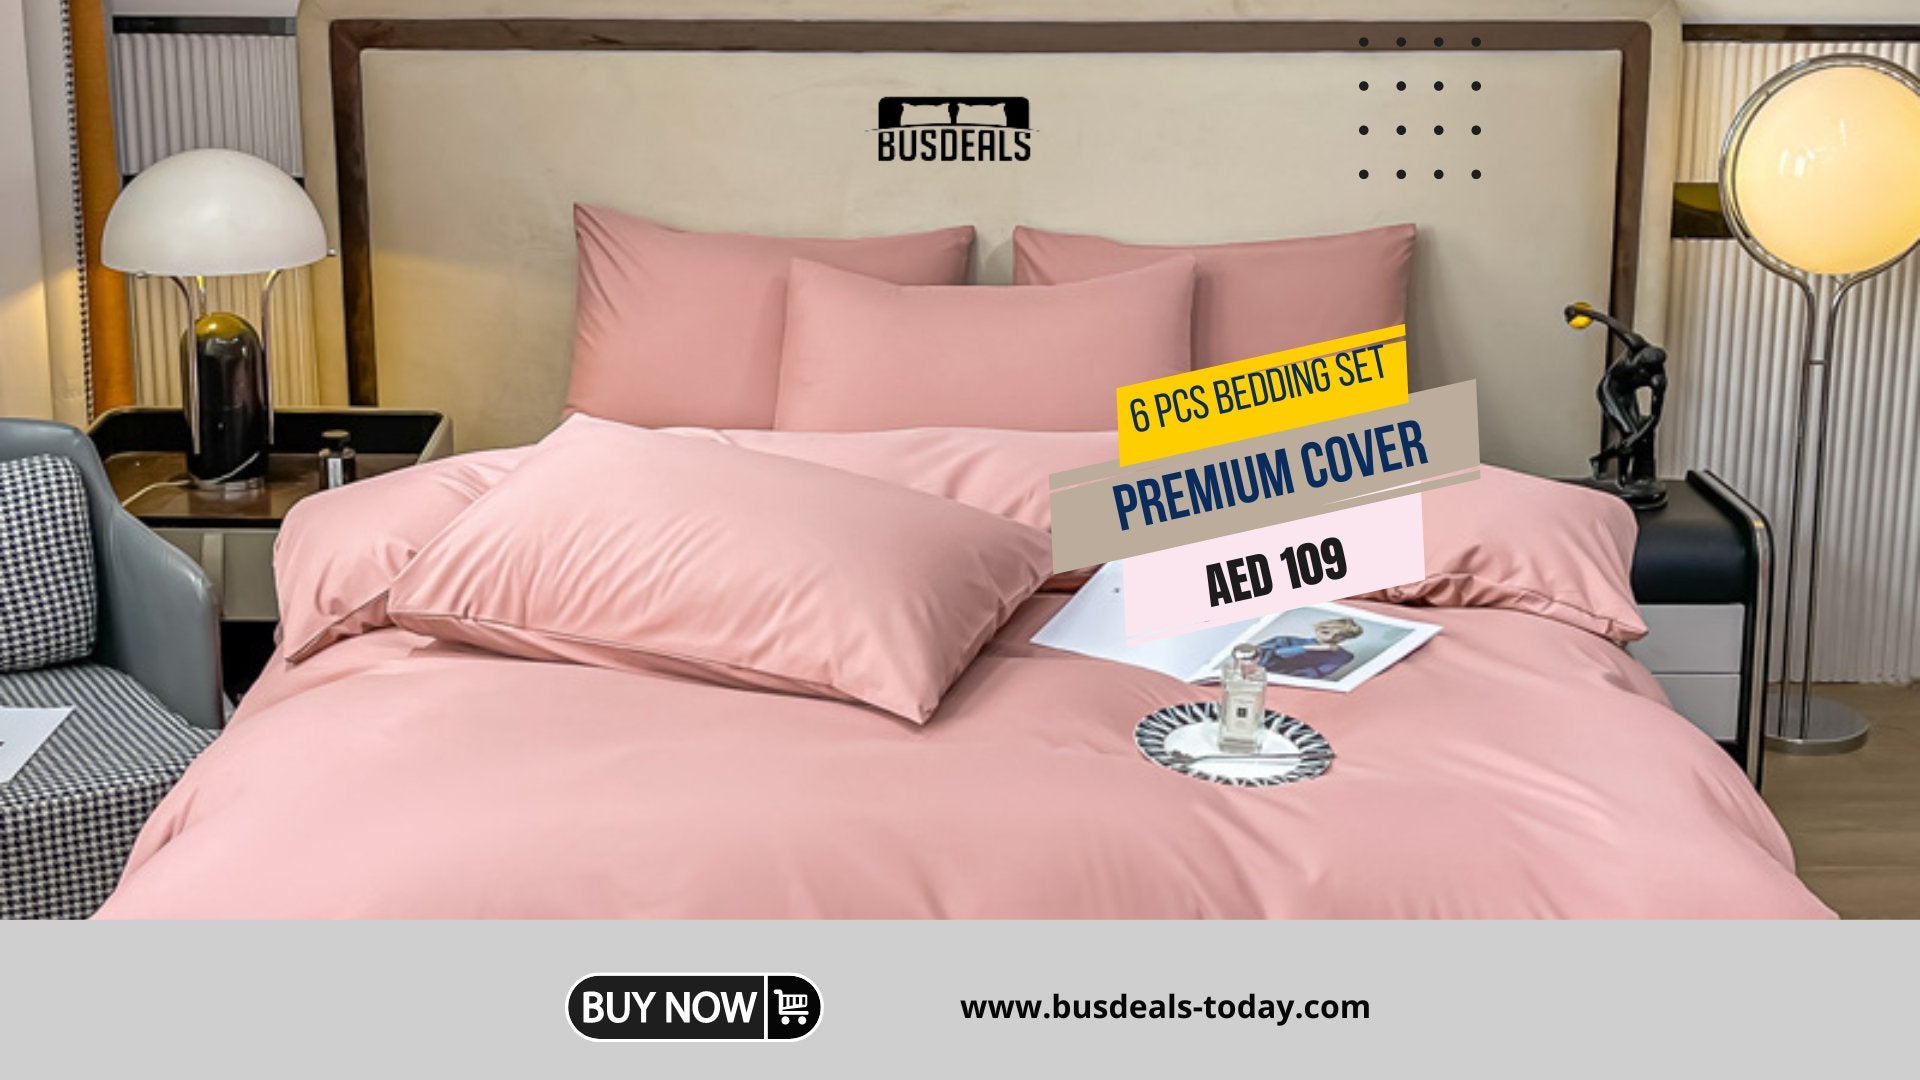 Transform Your Sleep with Bed Sheets from Busdeals Today - BusDeals